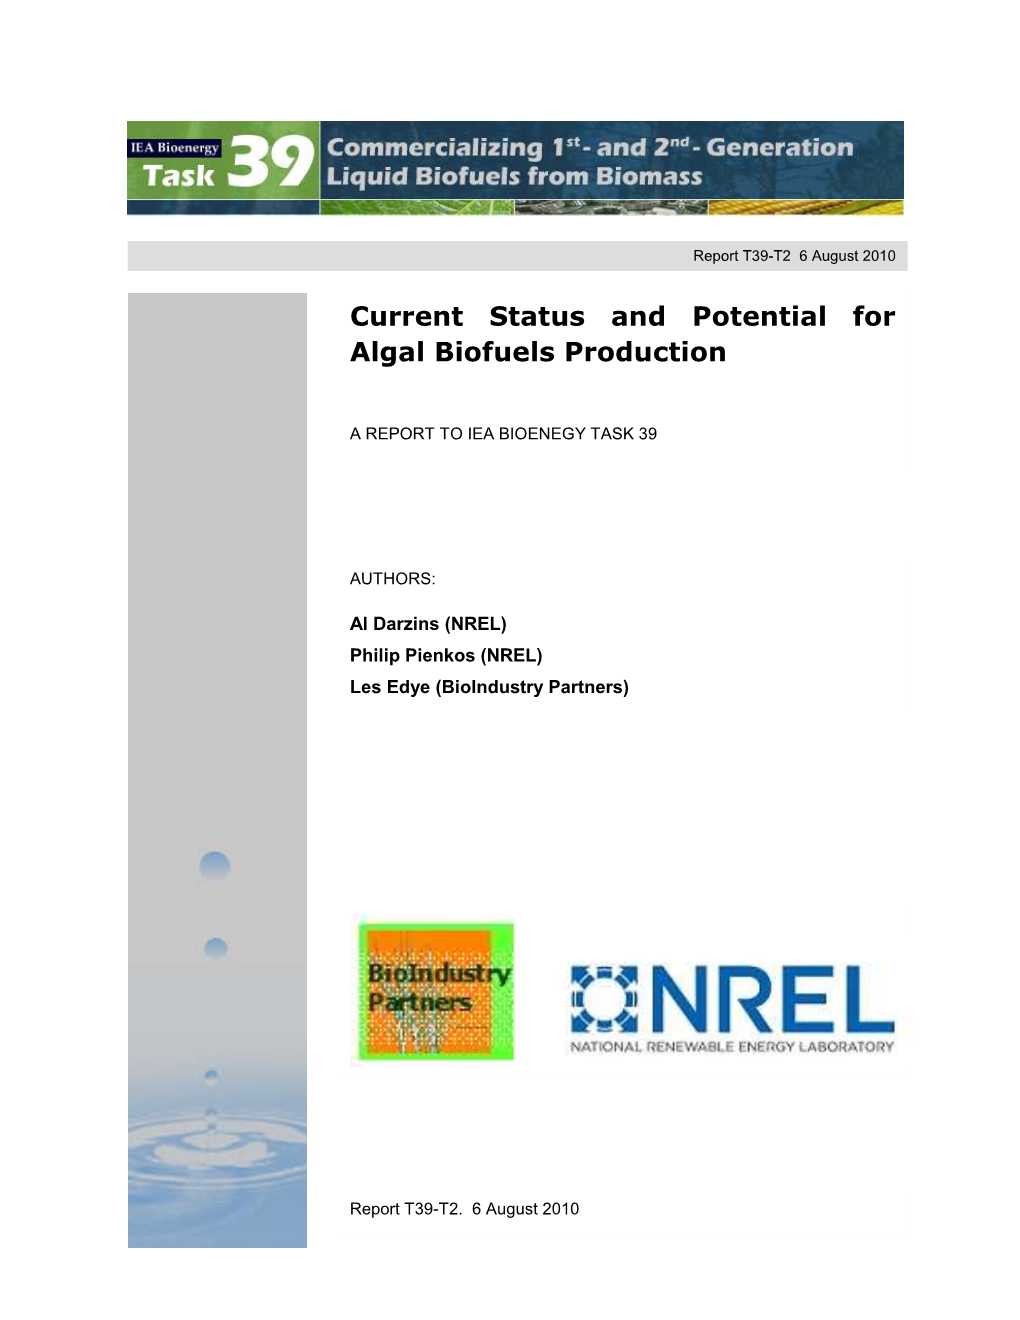 The Current Status and Potential for Algal Biofuels Production